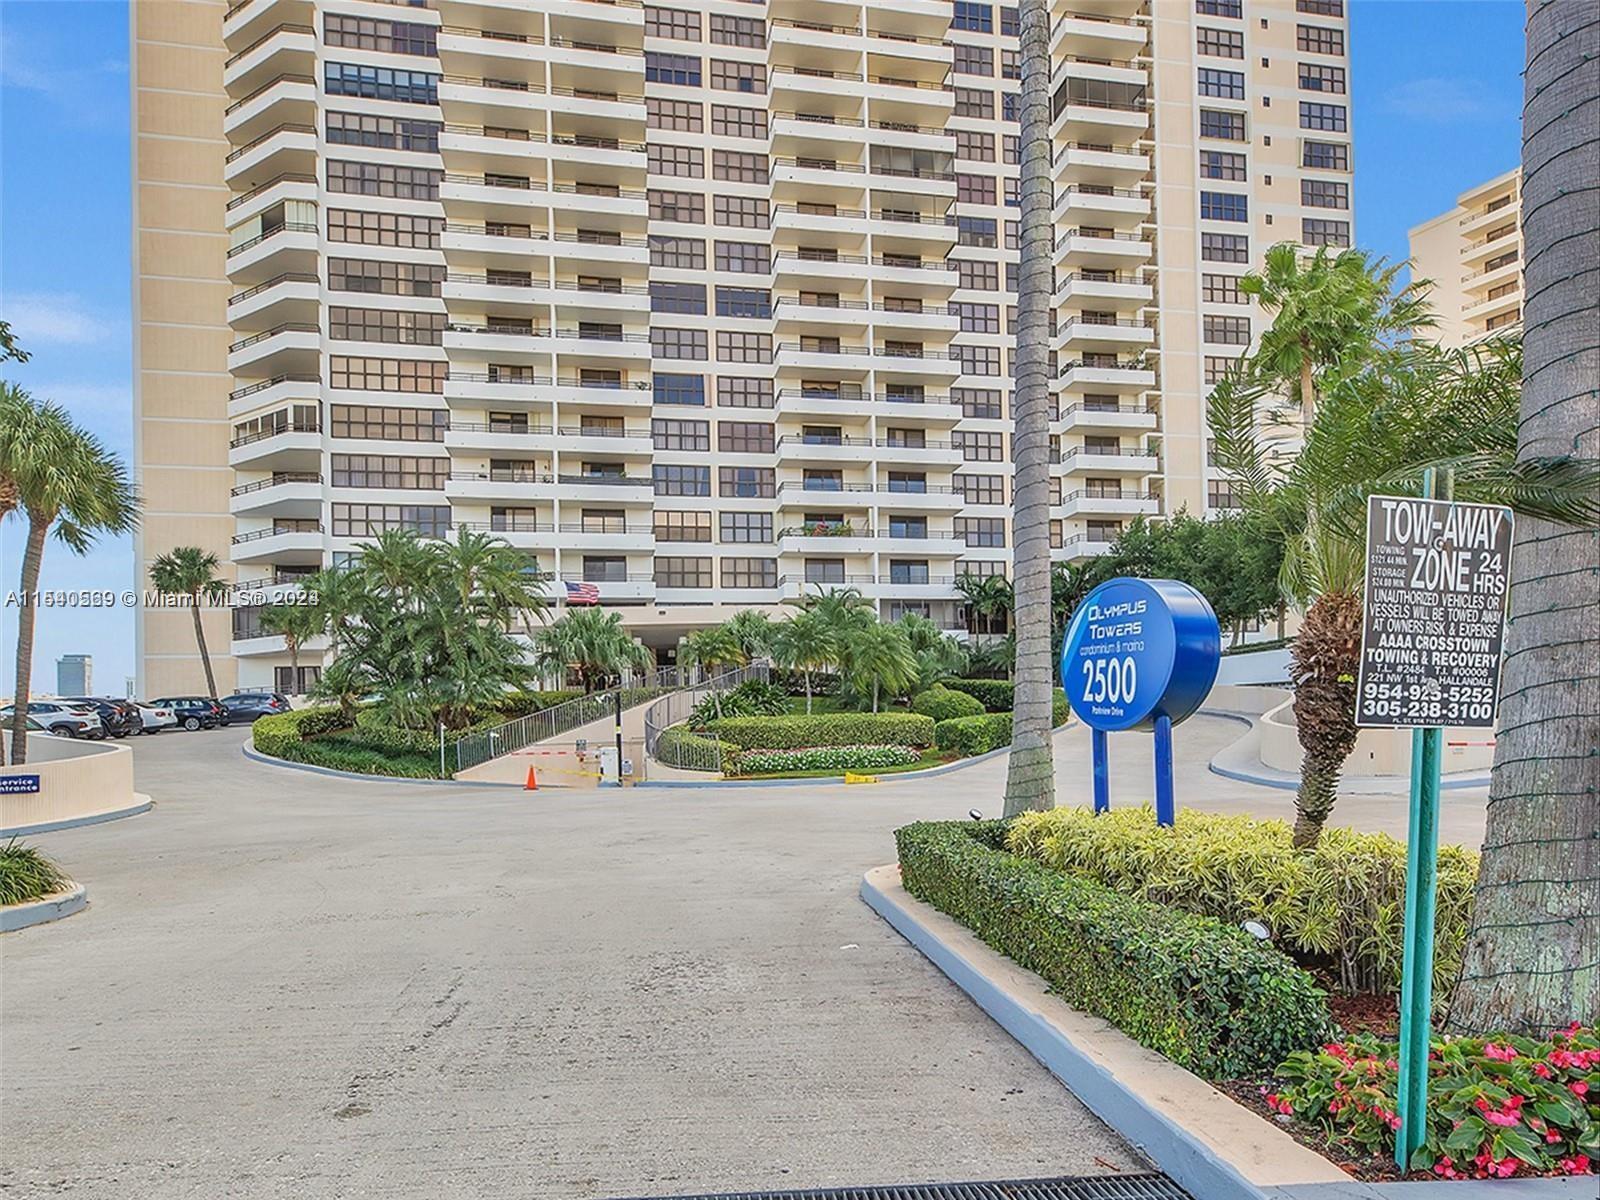 Photo of 2500 Parkview Dr #310 in Hallandale Beach, FL